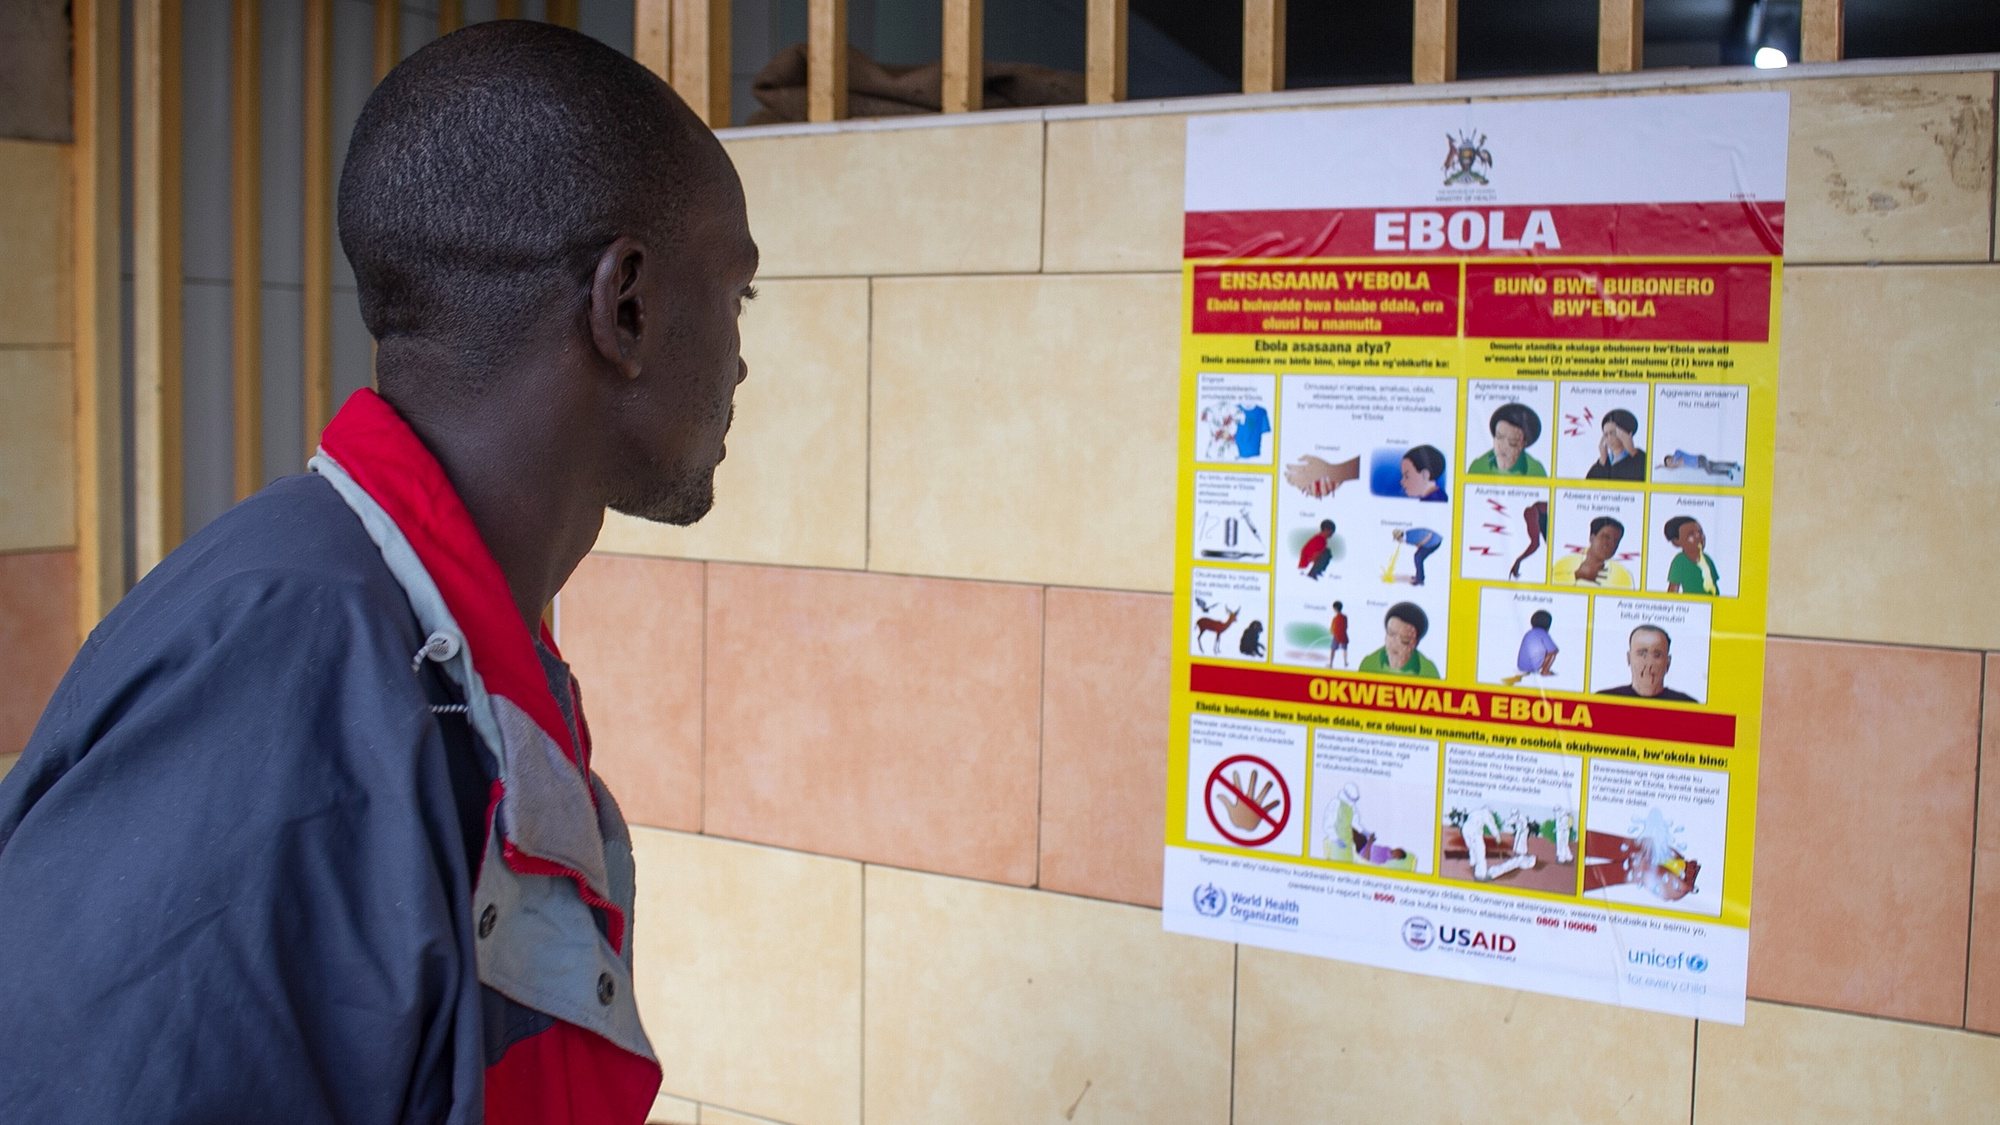 epa10212384 A man looks at an Ebola virus disease awareness campaign poster following an outbreak of Ebola in Uganda, in Kampala, Uganda, 28 September 2022. According to Uganda&#039;s Health Ministry, Ebola infections have risen across some districts in Uganda with the number of confirmed and suspected deaths at 36. The president addressed the nation on measures the government is putting in place to mitigate the spread.  EPA/Stringer